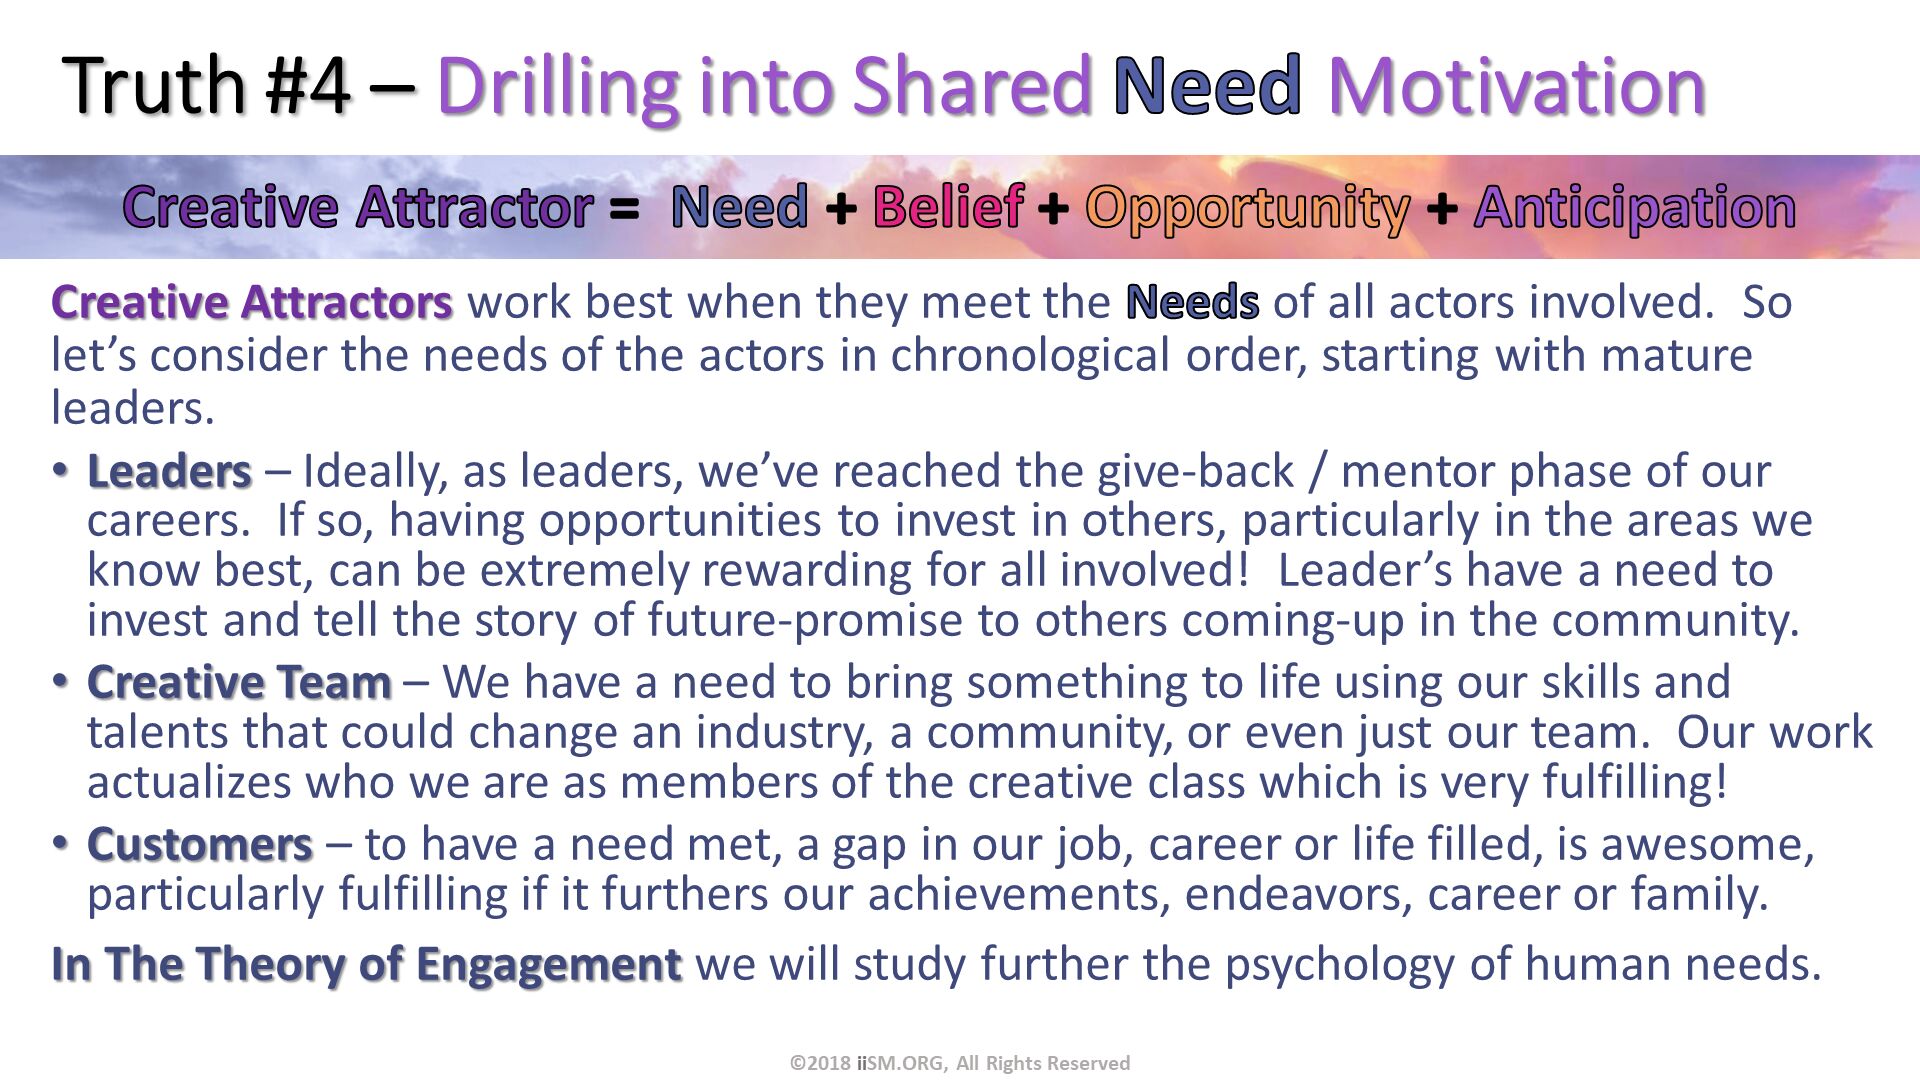 Truth #4 – Drilling into Shared Need Motivation. Creative Attractors work best when they meet the Needs of all actors involved.  So let’s consider the needs of the actors in chronological order, starting with mature leaders.
Leaders – Ideally, as leaders, we’ve reached the give-back / mentor phase of our careers.  If so, having opportunities to invest in others, particularly in the areas we know best, can be extremely rewarding for all involved!  Leader’s have a need to invest and tell the story of future-promise to others coming-up in the community.
Creative Team – We have a need to bring something to life using our skills and talents that could change an industry, a community, or even just our team.  Our work actualizes who we are as members of the creative class which is very fulfilling!
Customers – to have a need met, a gap in our job, career or life filled, is awesome, particularly fulfilling if it furthers our achievements, endeavors, career or family.
In The Theory of Engagement we will study further the psychology of human needs.
. ©2018 iiSM.ORG, All Rights Reserved. 